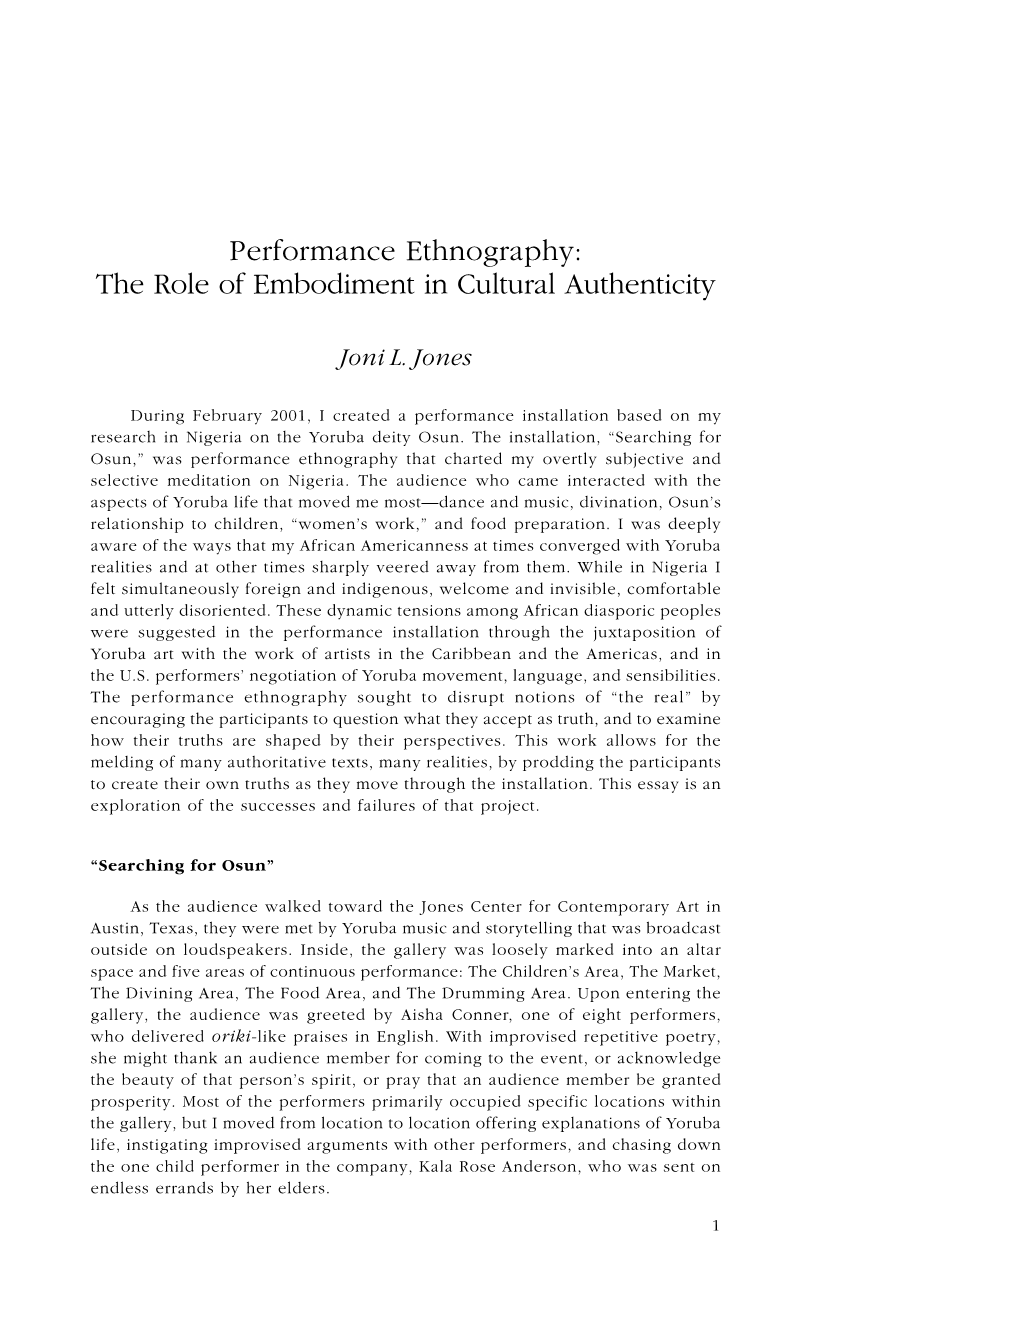 Performance Ethnography: the Role of Embodiment in Cultural Authenticity